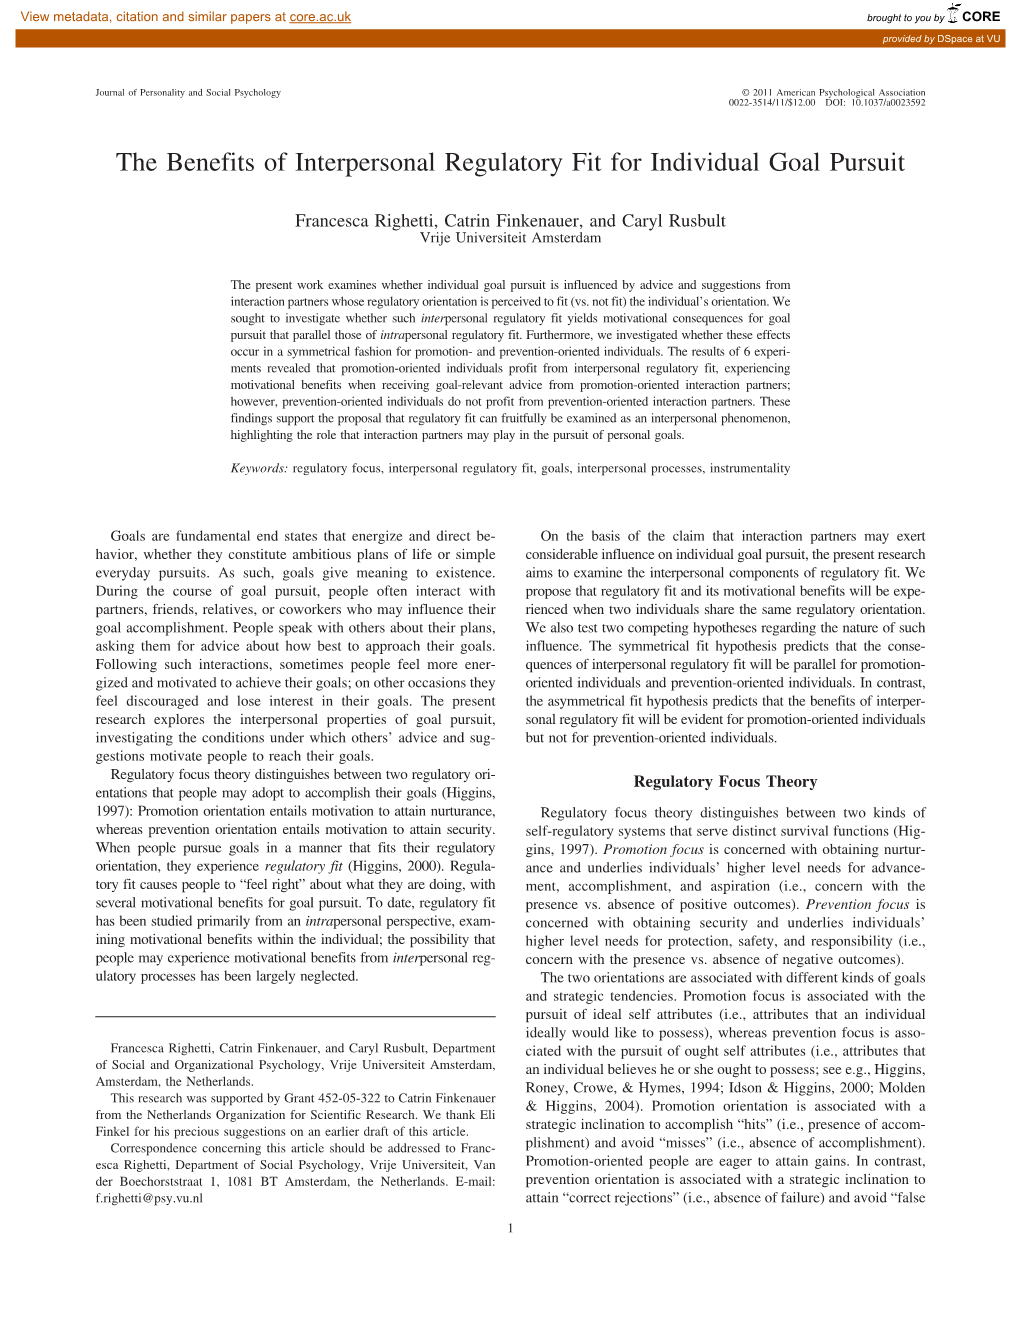 The Benefits of Interpersonal Regulatory Fit for Individual Goal Pursuit